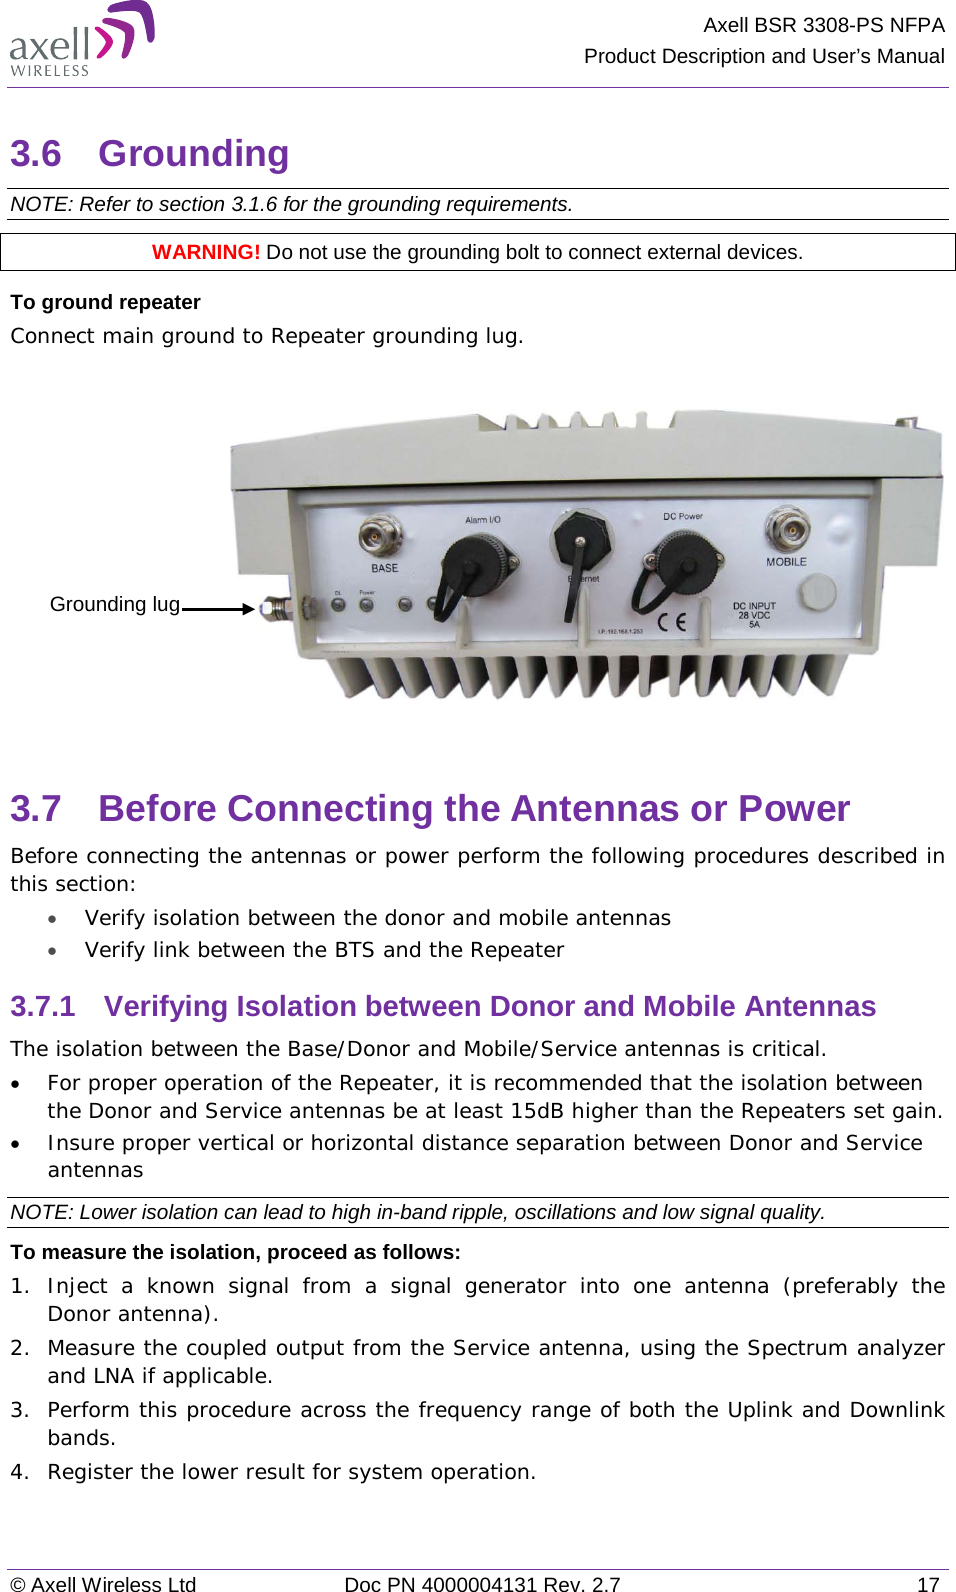 Axell BSR 3308-PS NFPA Product Description and User’s Manual © Axell Wireless Ltd Doc PN 4000004131 Rev. 2.7 17 3.6  Grounding  NOTE: Refer to section  3.1.6 for the grounding requirements. WARNING! Do not use the grounding bolt to connect external devices. To ground repeater Connect main ground to Repeater grounding lug.     3.7  Before Connecting the Antennas or Power Before connecting the antennas or power perform the following procedures described in this section: • Verify isolation between the donor and mobile antennas • Verify link between the BTS and the Repeater 3.7.1  Verifying Isolation between Donor and Mobile Antennas  The isolation between the Base/Donor and Mobile/Service antennas is critical. • For proper operation of the Repeater, it is recommended that the isolation between the Donor and Service antennas be at least 15dB higher than the Repeaters set gain.  • Insure proper vertical or horizontal distance separation between Donor and Service antennas NOTE: Lower isolation can lead to high in-band ripple, oscillations and low signal quality.  To measure the isolation, proceed as follows:  1.  Inject a known signal from a signal generator into one antenna (preferably the Donor antenna).  2.  Measure the coupled output from the Service antenna, using the Spectrum analyzer and LNA if applicable. 3.  Perform this procedure across the frequency range of both the Uplink and Downlink bands.  4.  Register the lower result for system operation. Grounding lug 